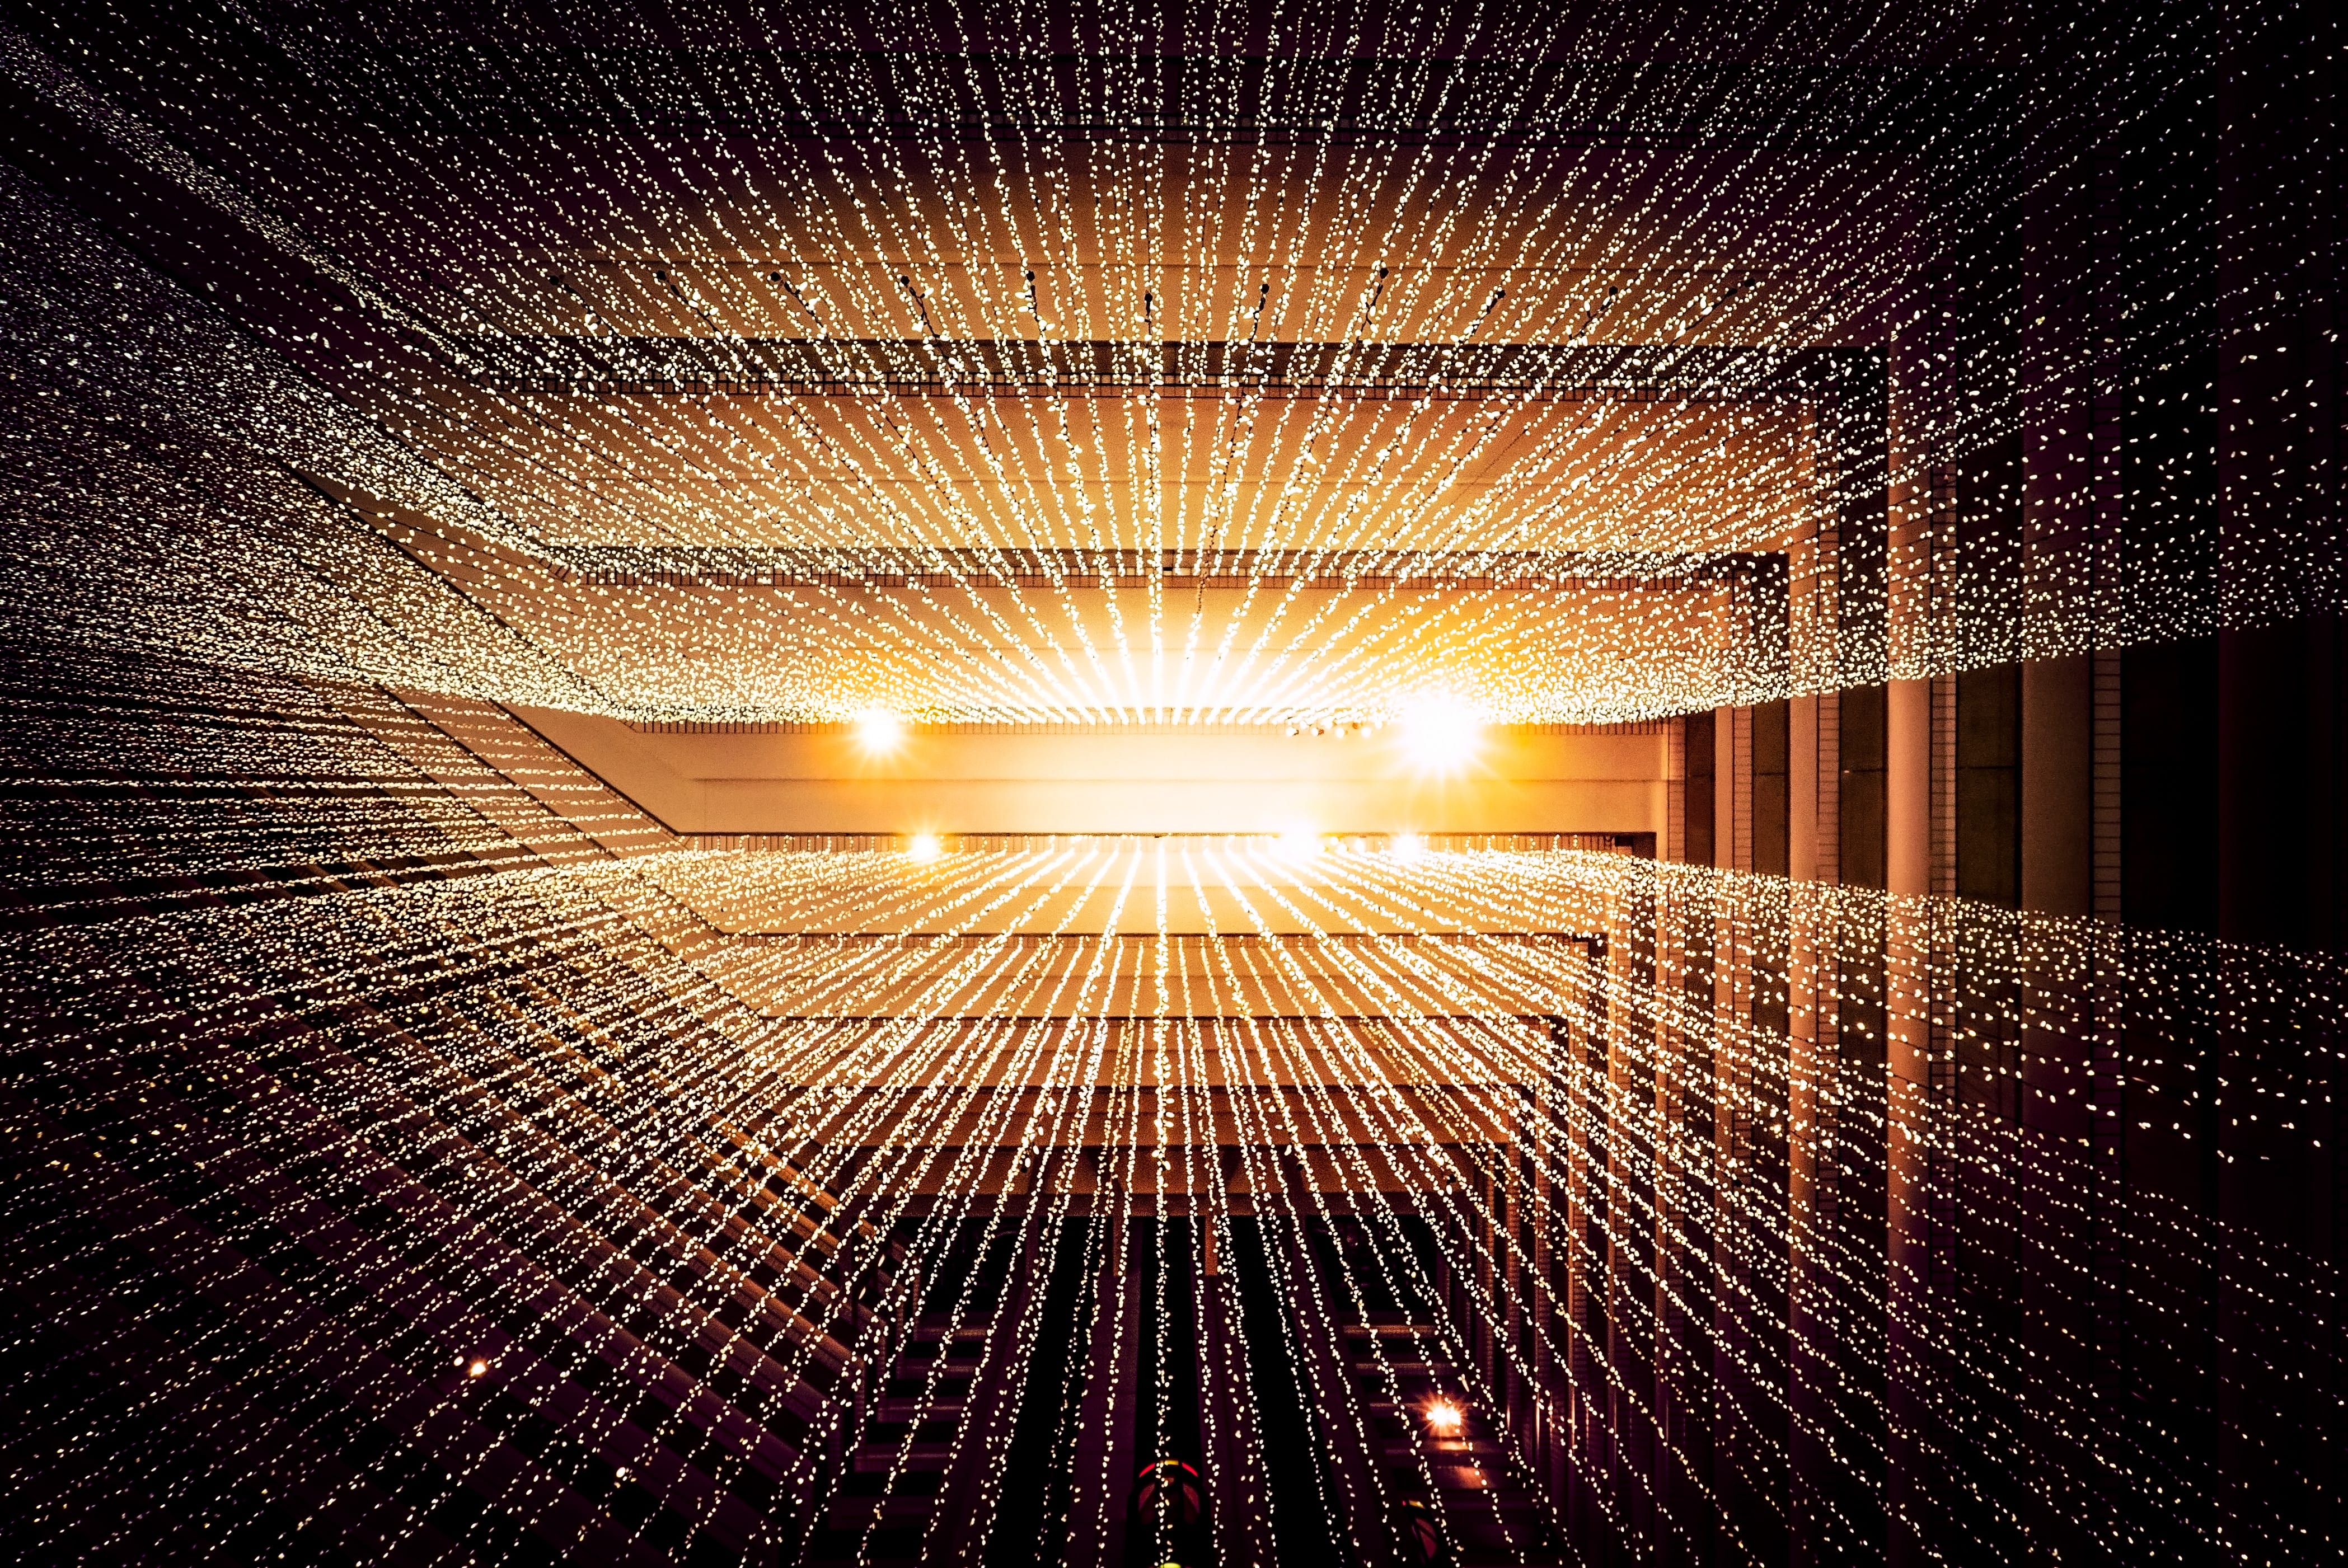 Graphic depiction of data flowing as golden light; image by Joshua Sortino, via Unsplash.com.